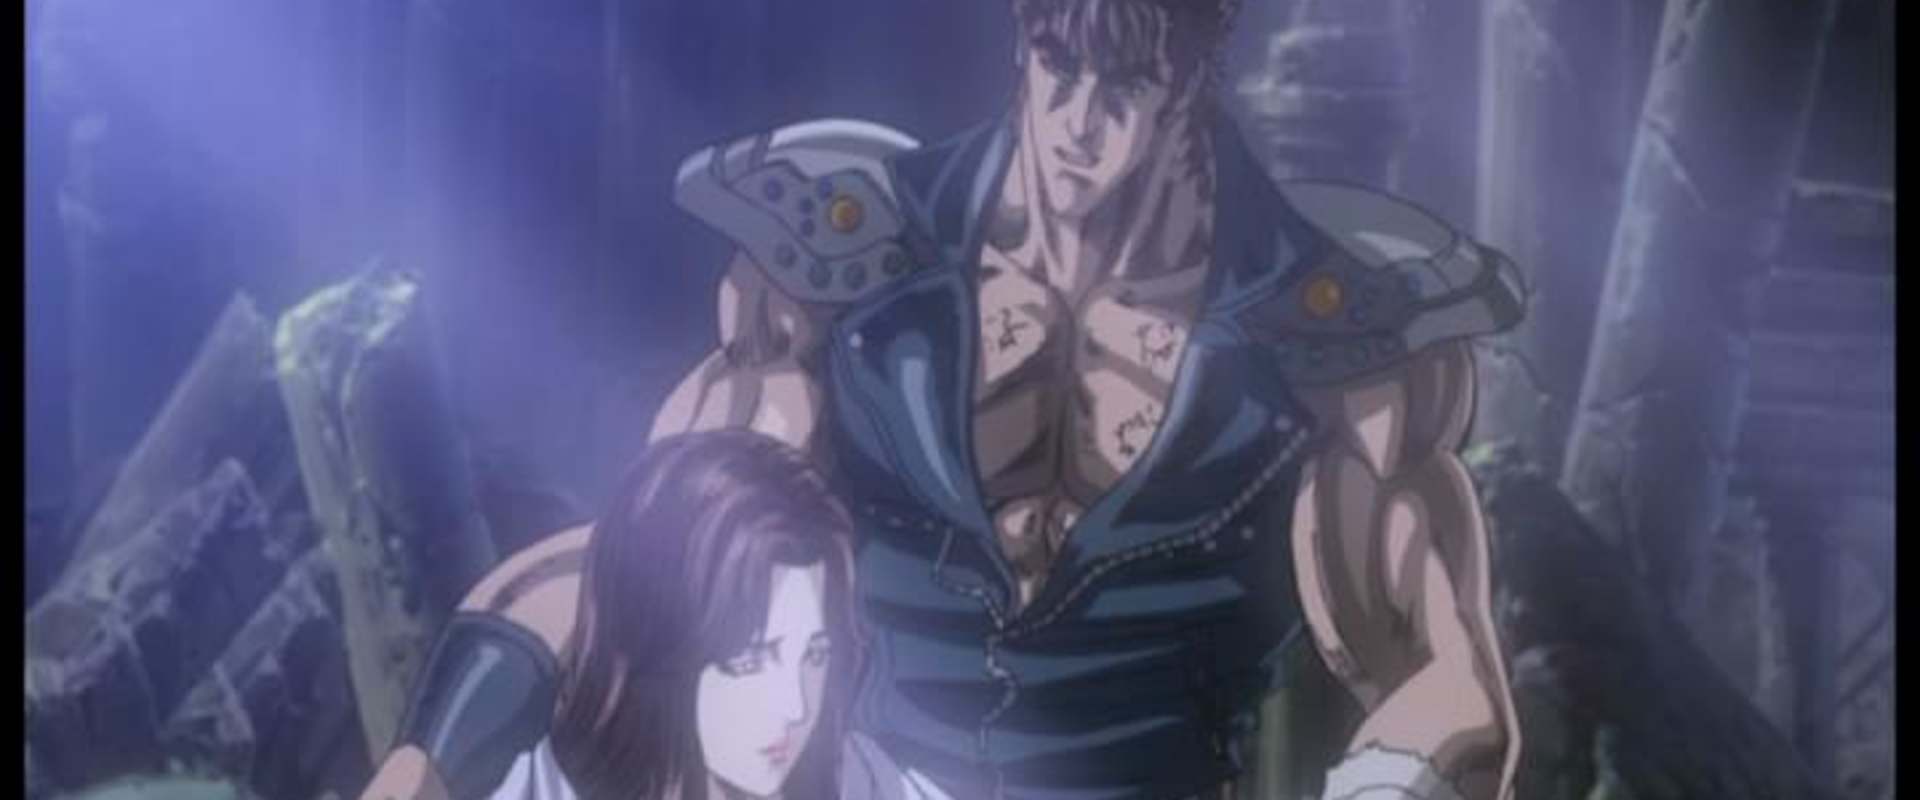 Fist of the North Star: The Legend of Kenshiro background 2